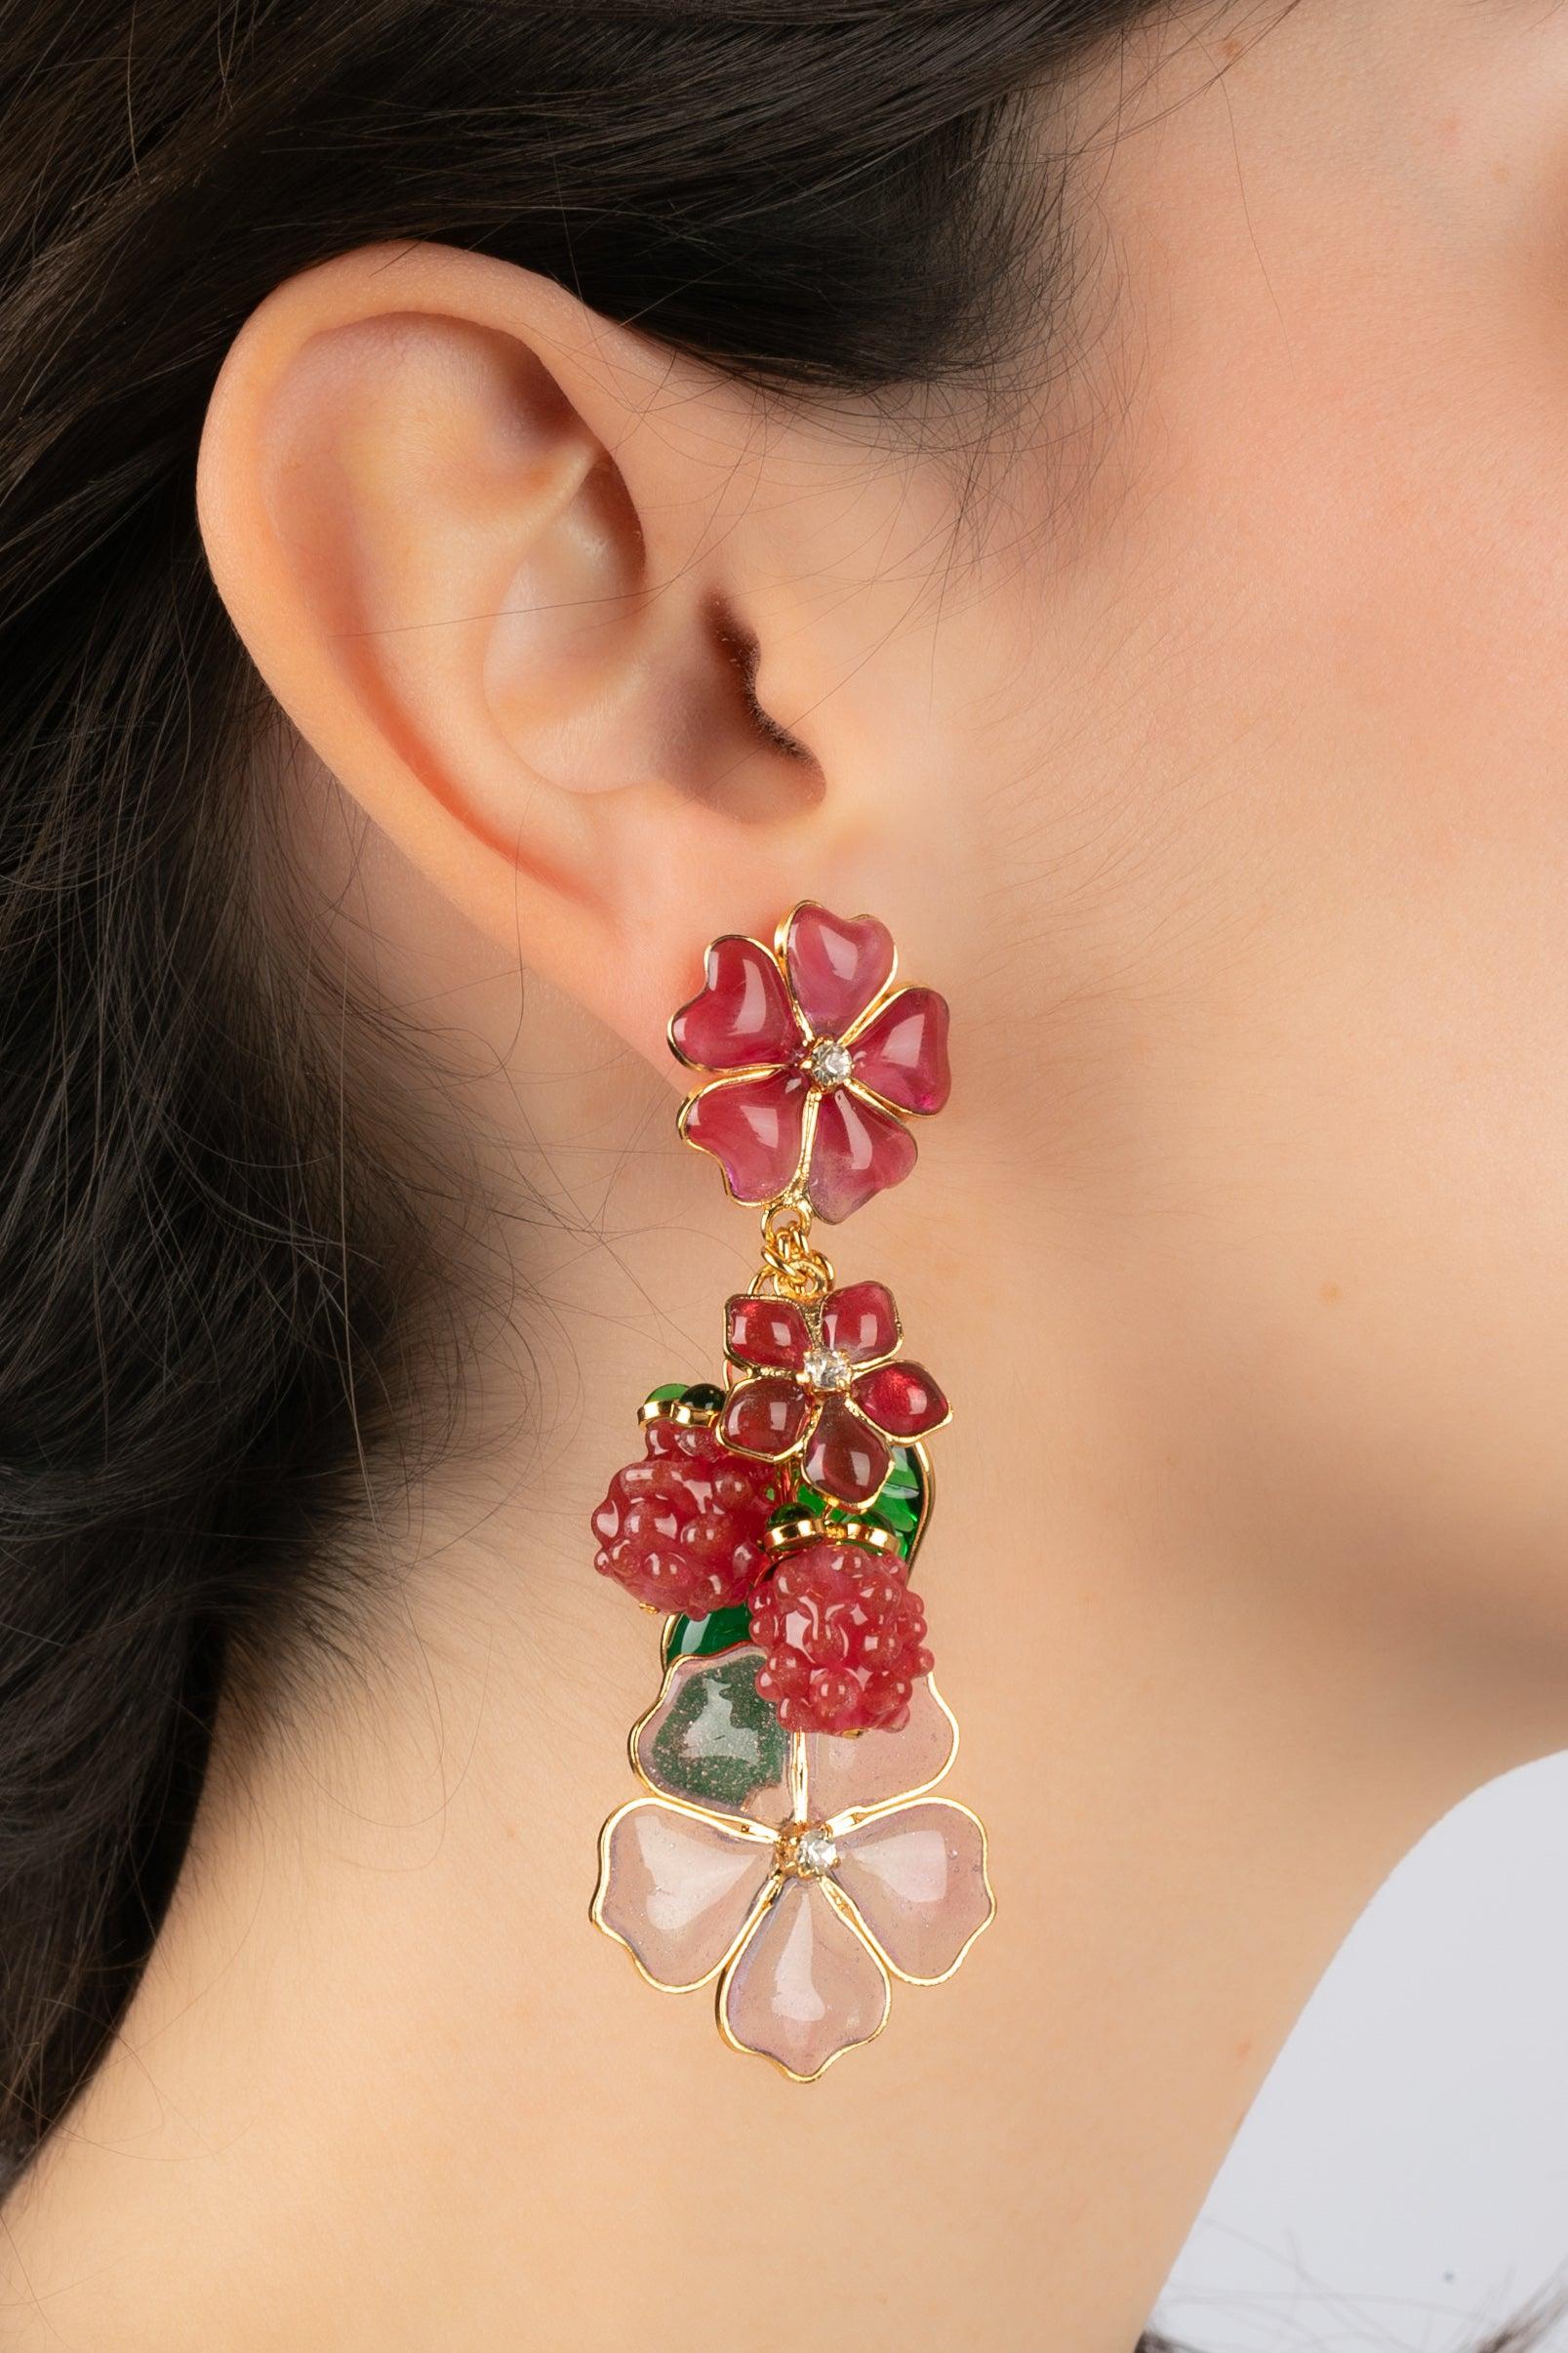 Augustine- (Made in France) Golden metal earrings with glass paste raspberries and flowers in pink and green tones.

Additional information:
Condition: Very good condition
Dimensions: Length: 8 cm

Seller Reference: BO254
